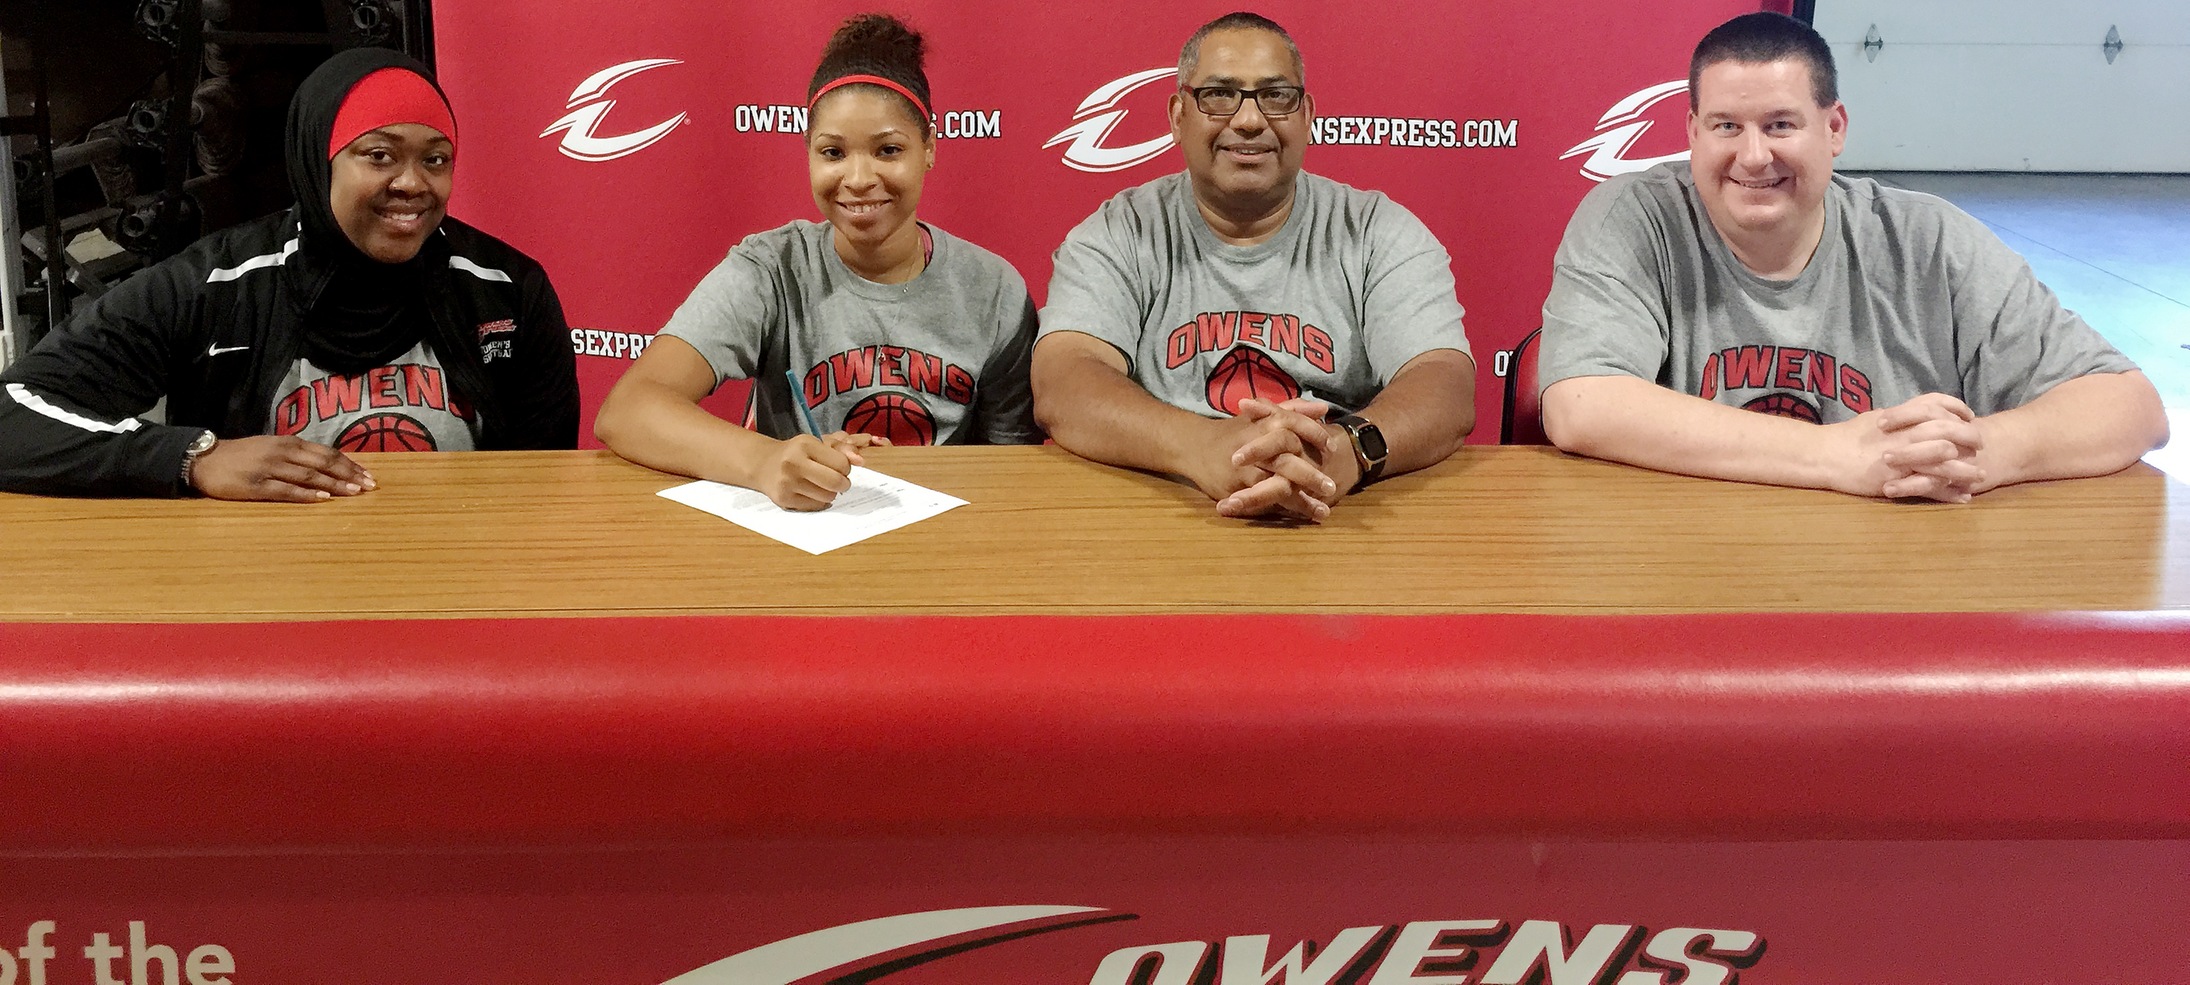 Fremont's Kiser Transfers To Owens, Will Suit Up For WBB Team In 2017-18